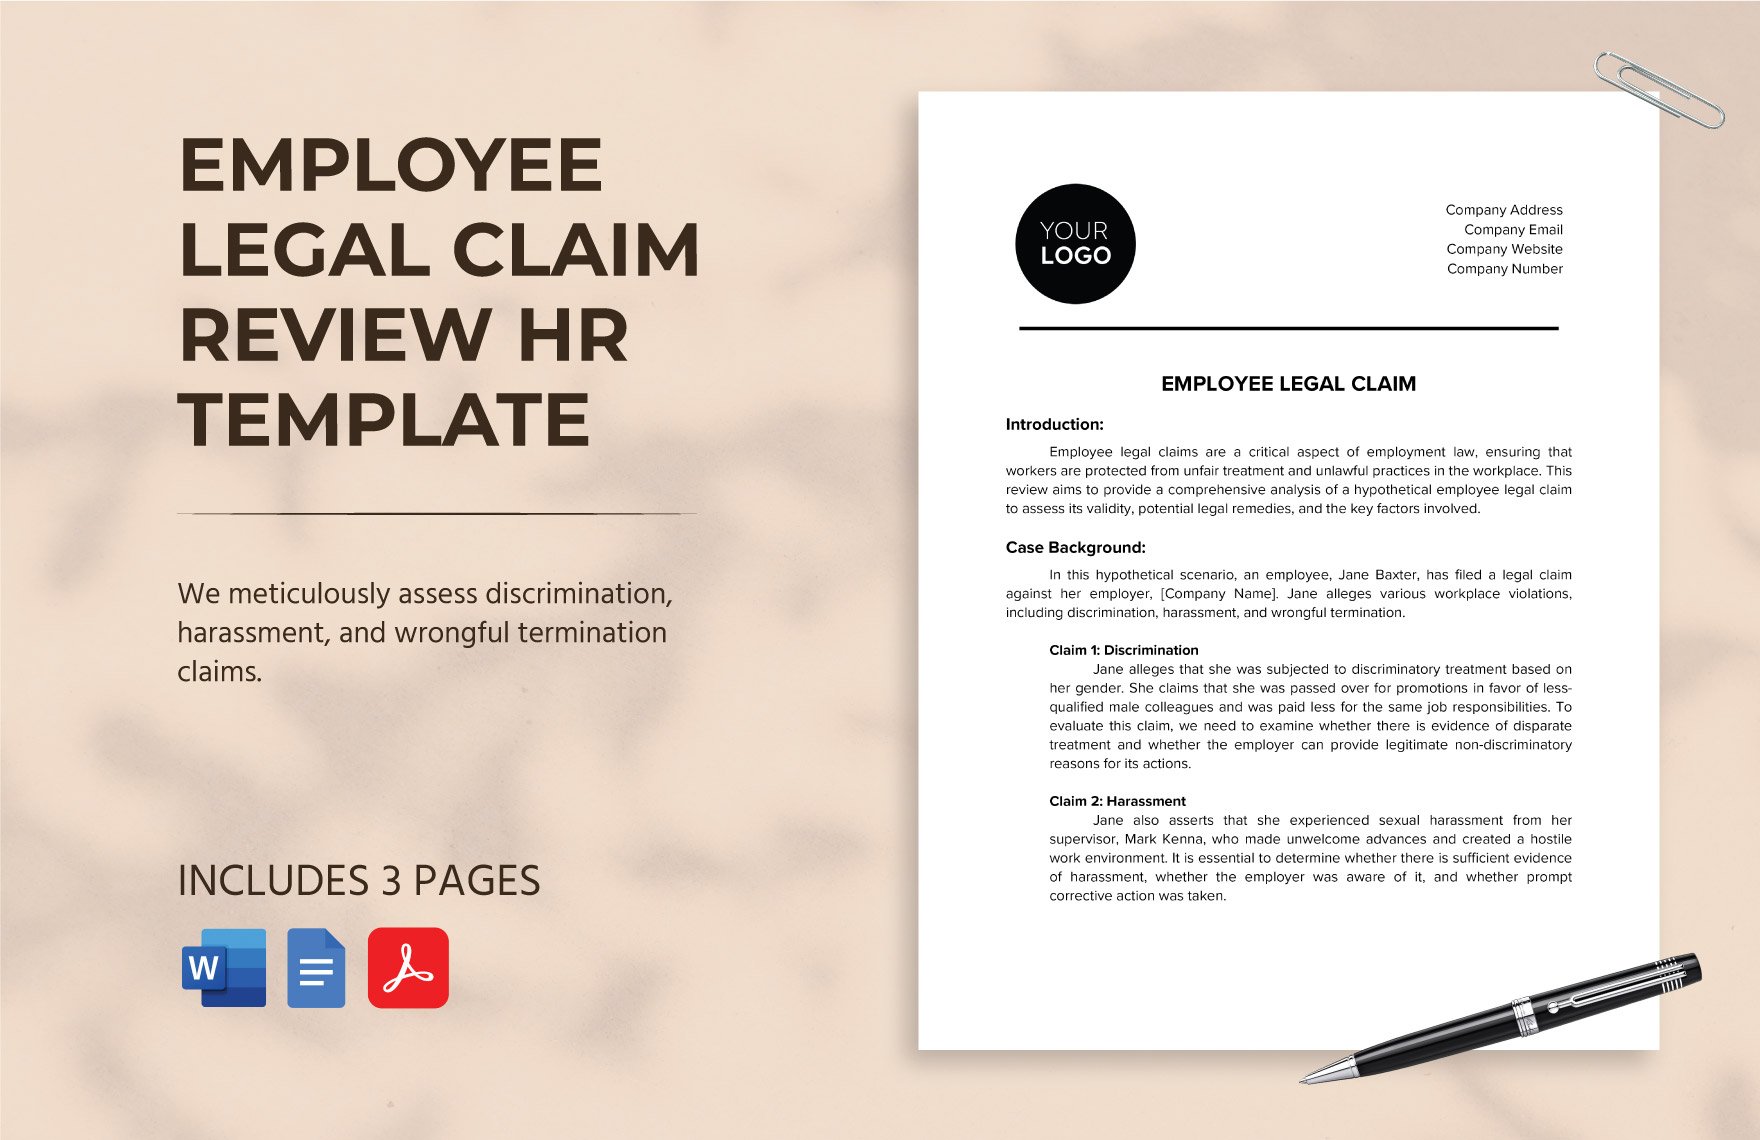 Employee Legal Claim Review HR Template in Word, Google Docs, PDF